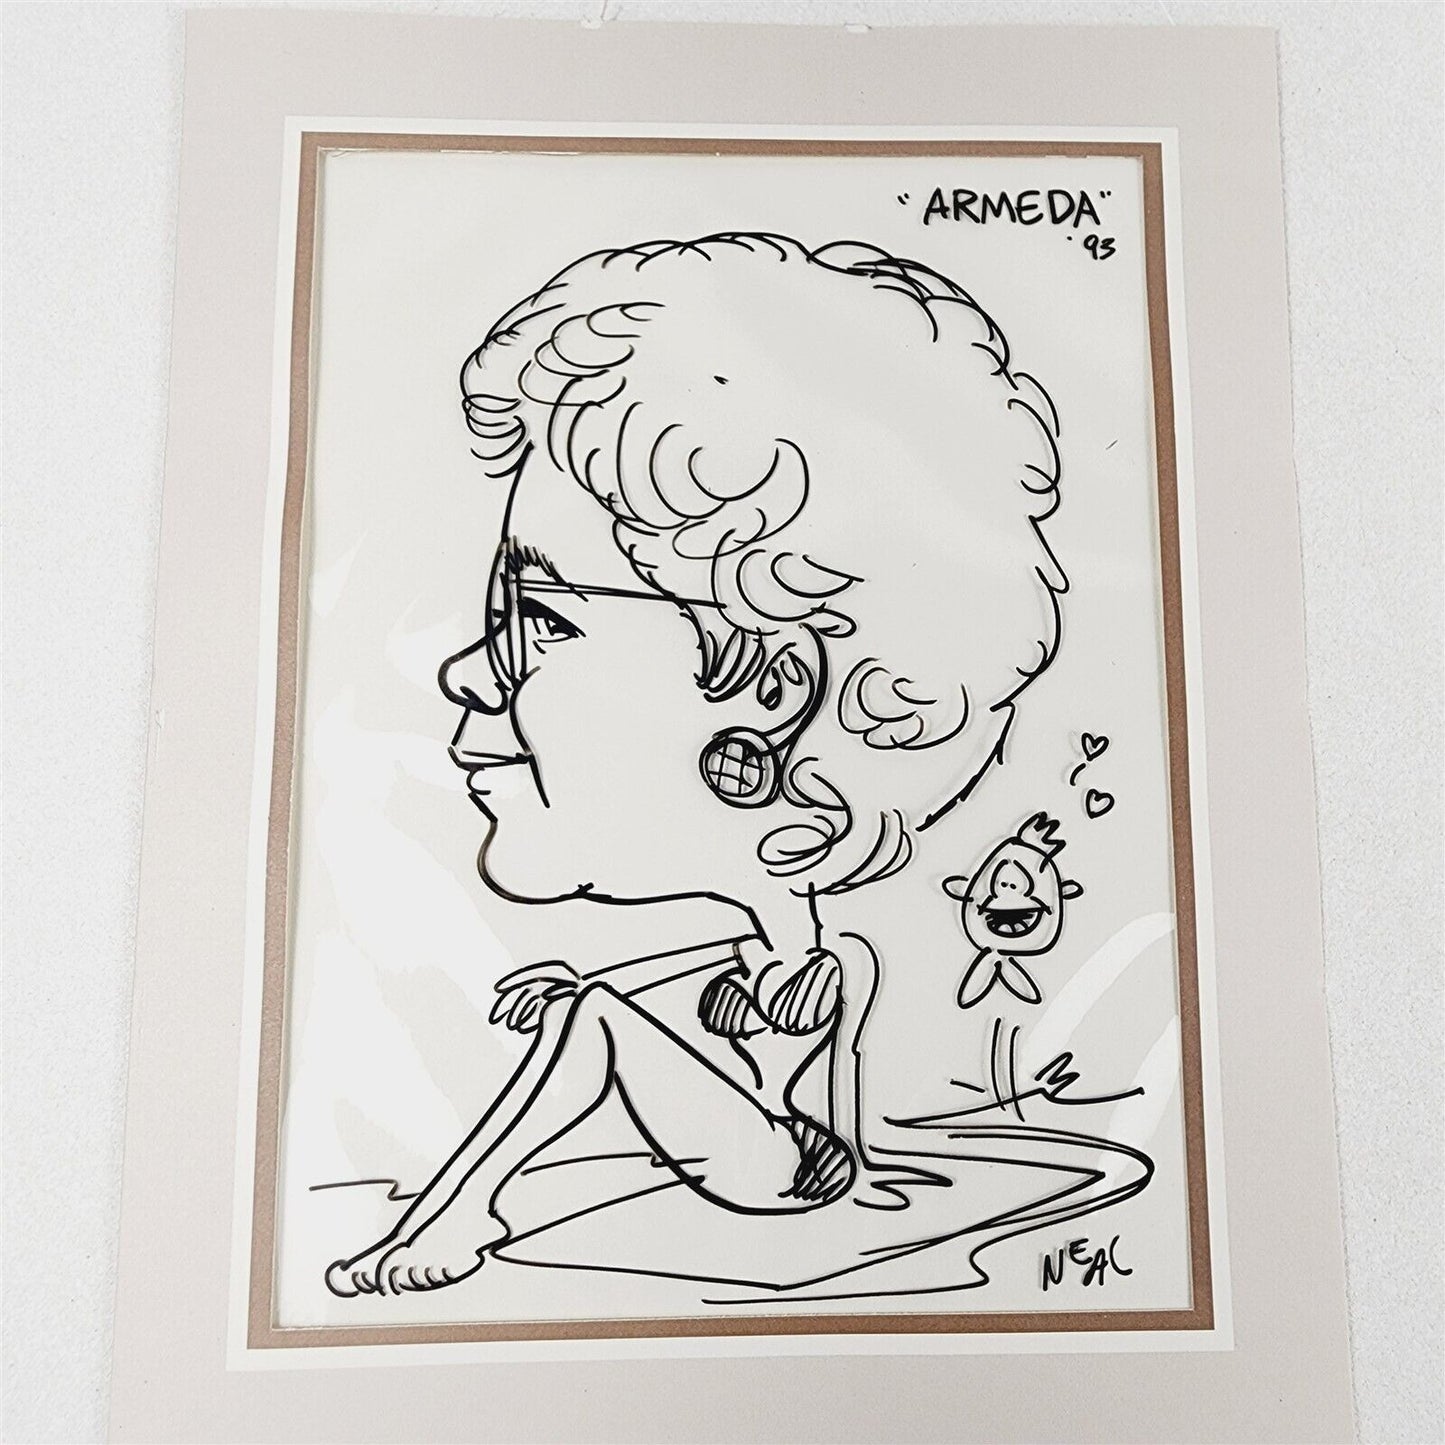 2 Funny Cartoon Sketches Caricatures by Neal, Armeda Beach Beauty Clyde Fishing